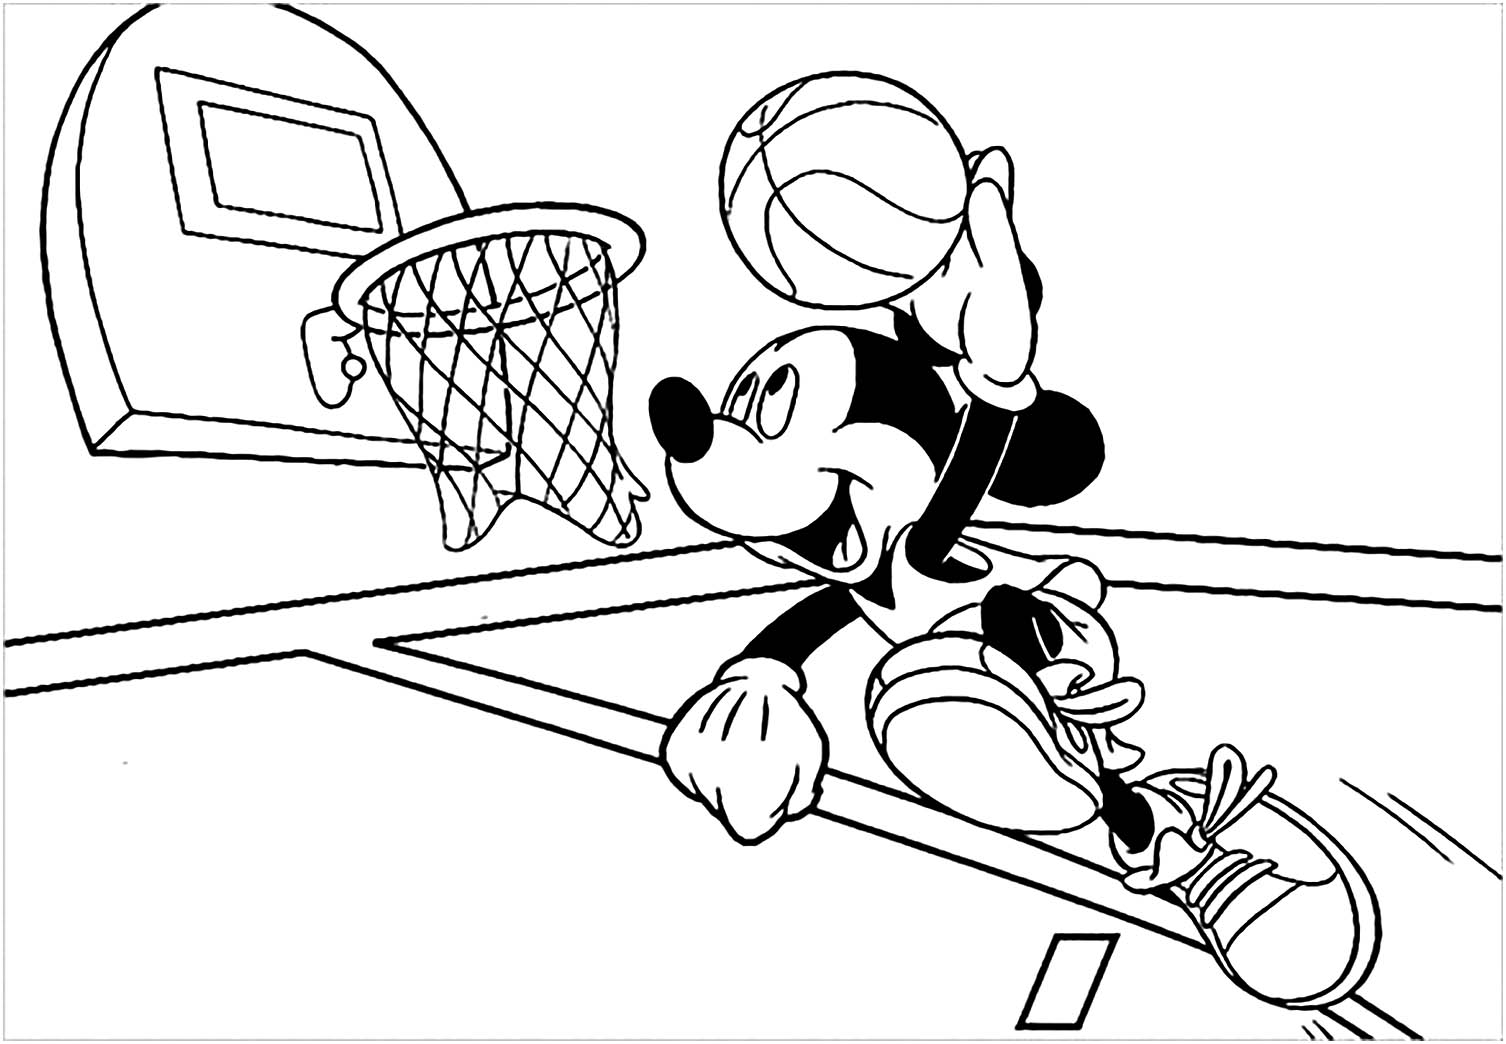 Download 244+ Printable Basketball Pictures Coloring Pages PNG PDF File